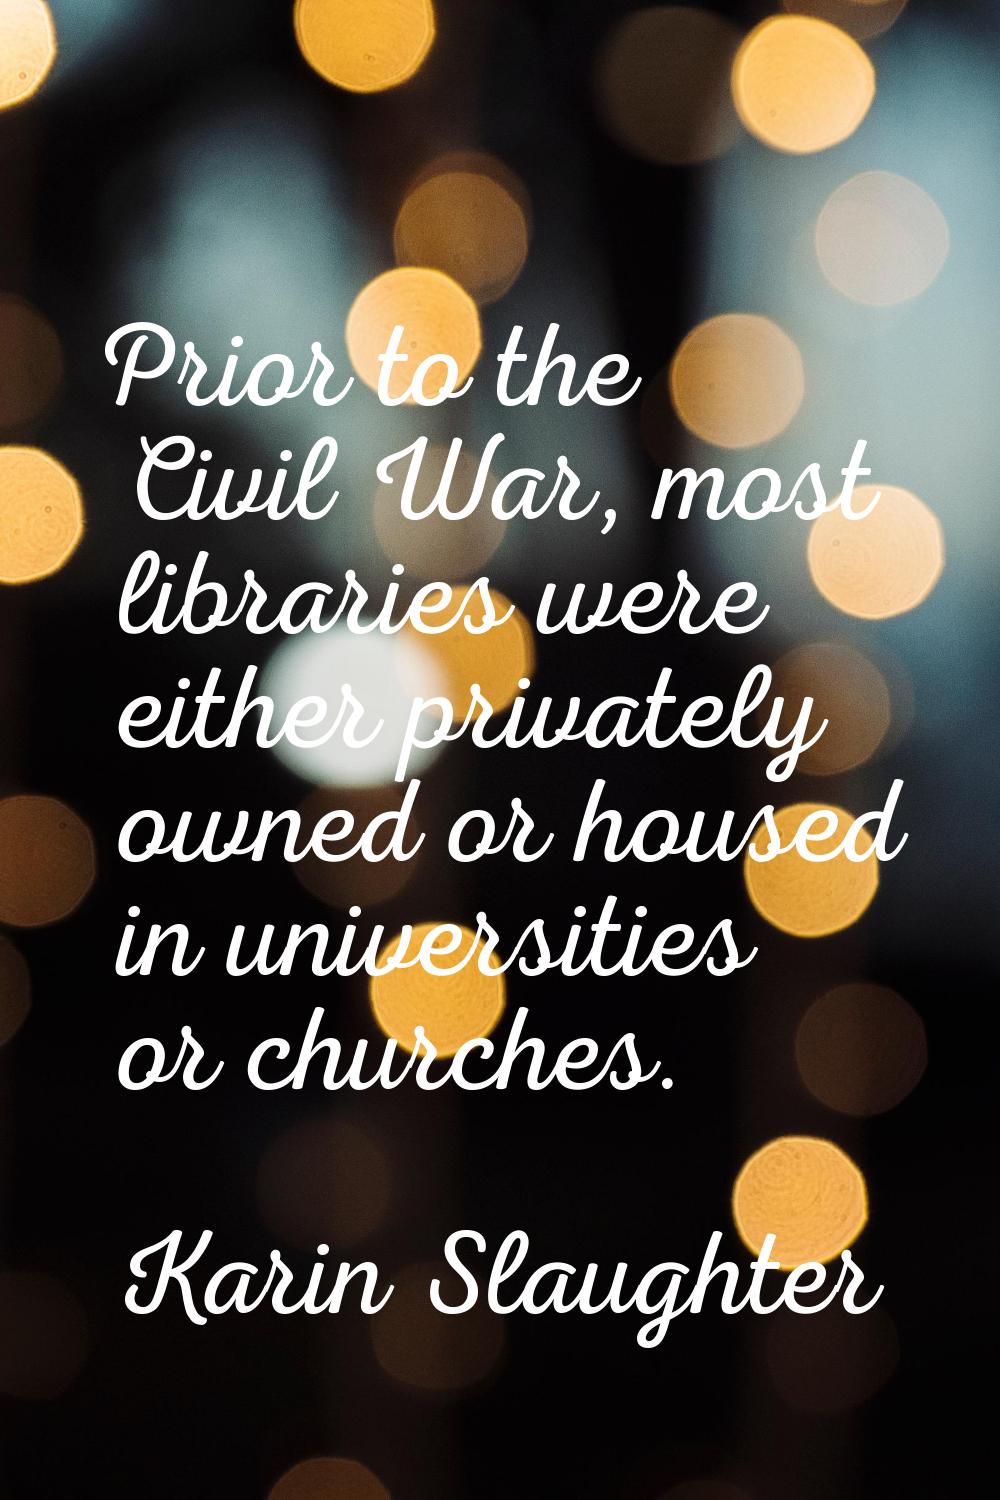 Prior to the Civil War, most libraries were either privately owned or housed in universities or chu